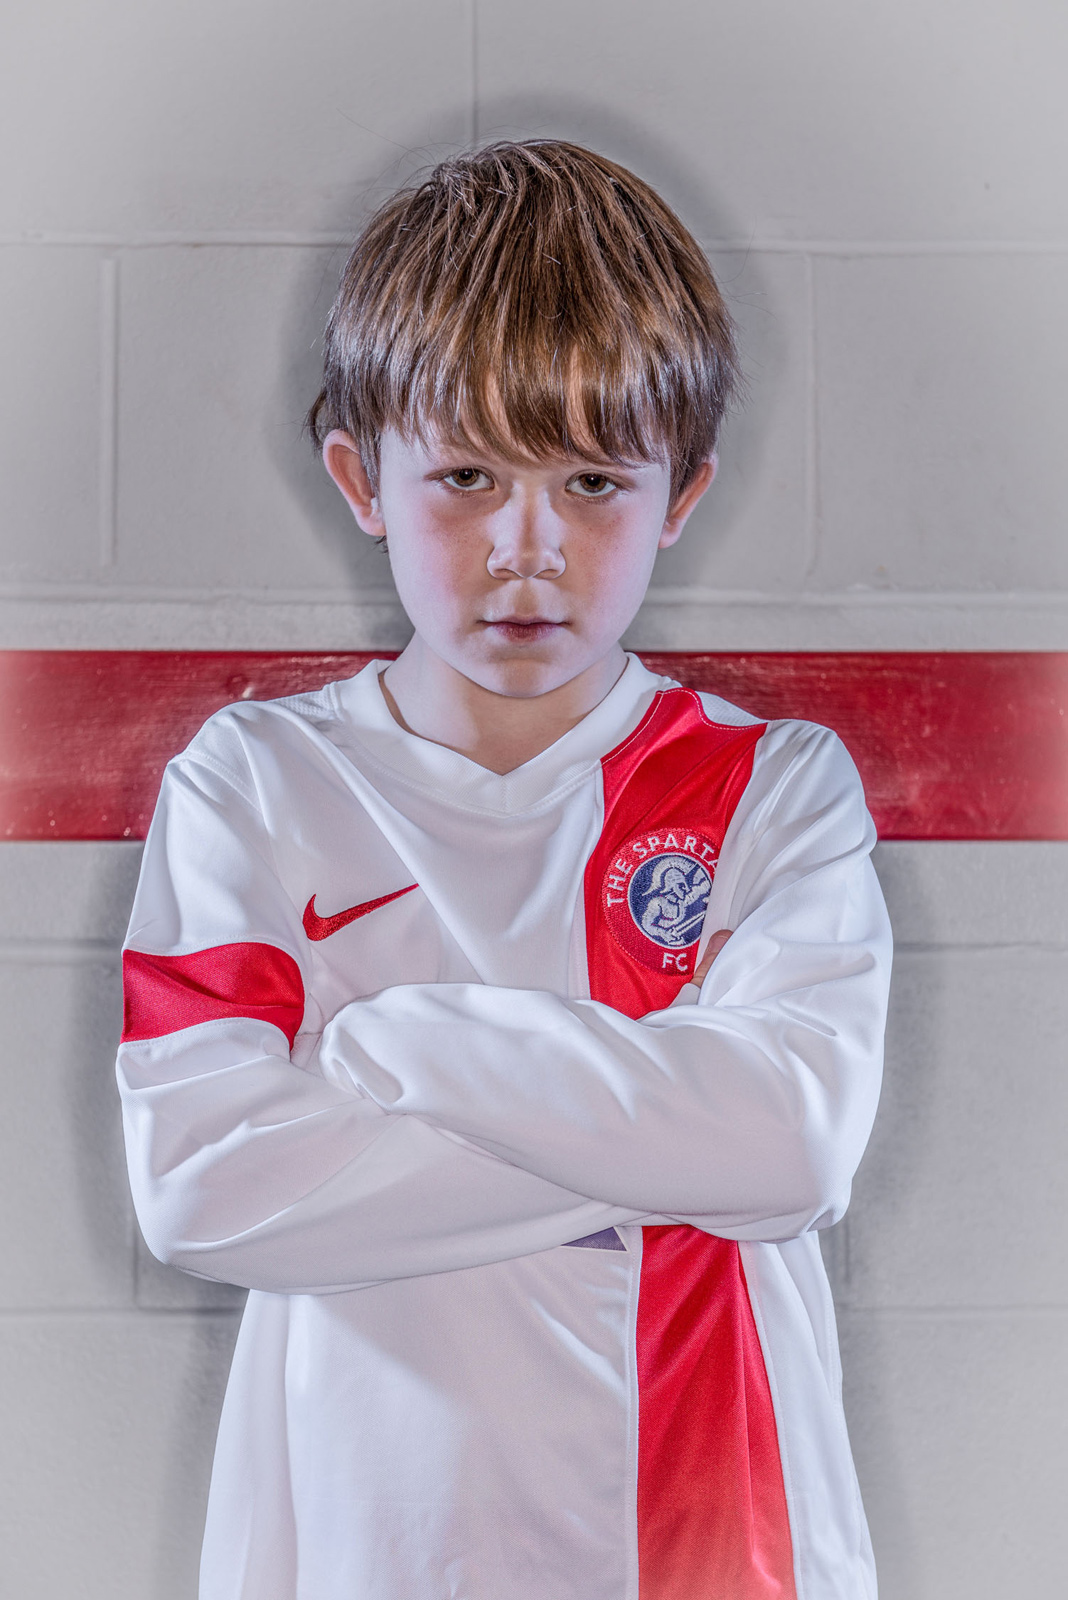 Portrait of young boy in football kit standing in changing rooms staring at camera